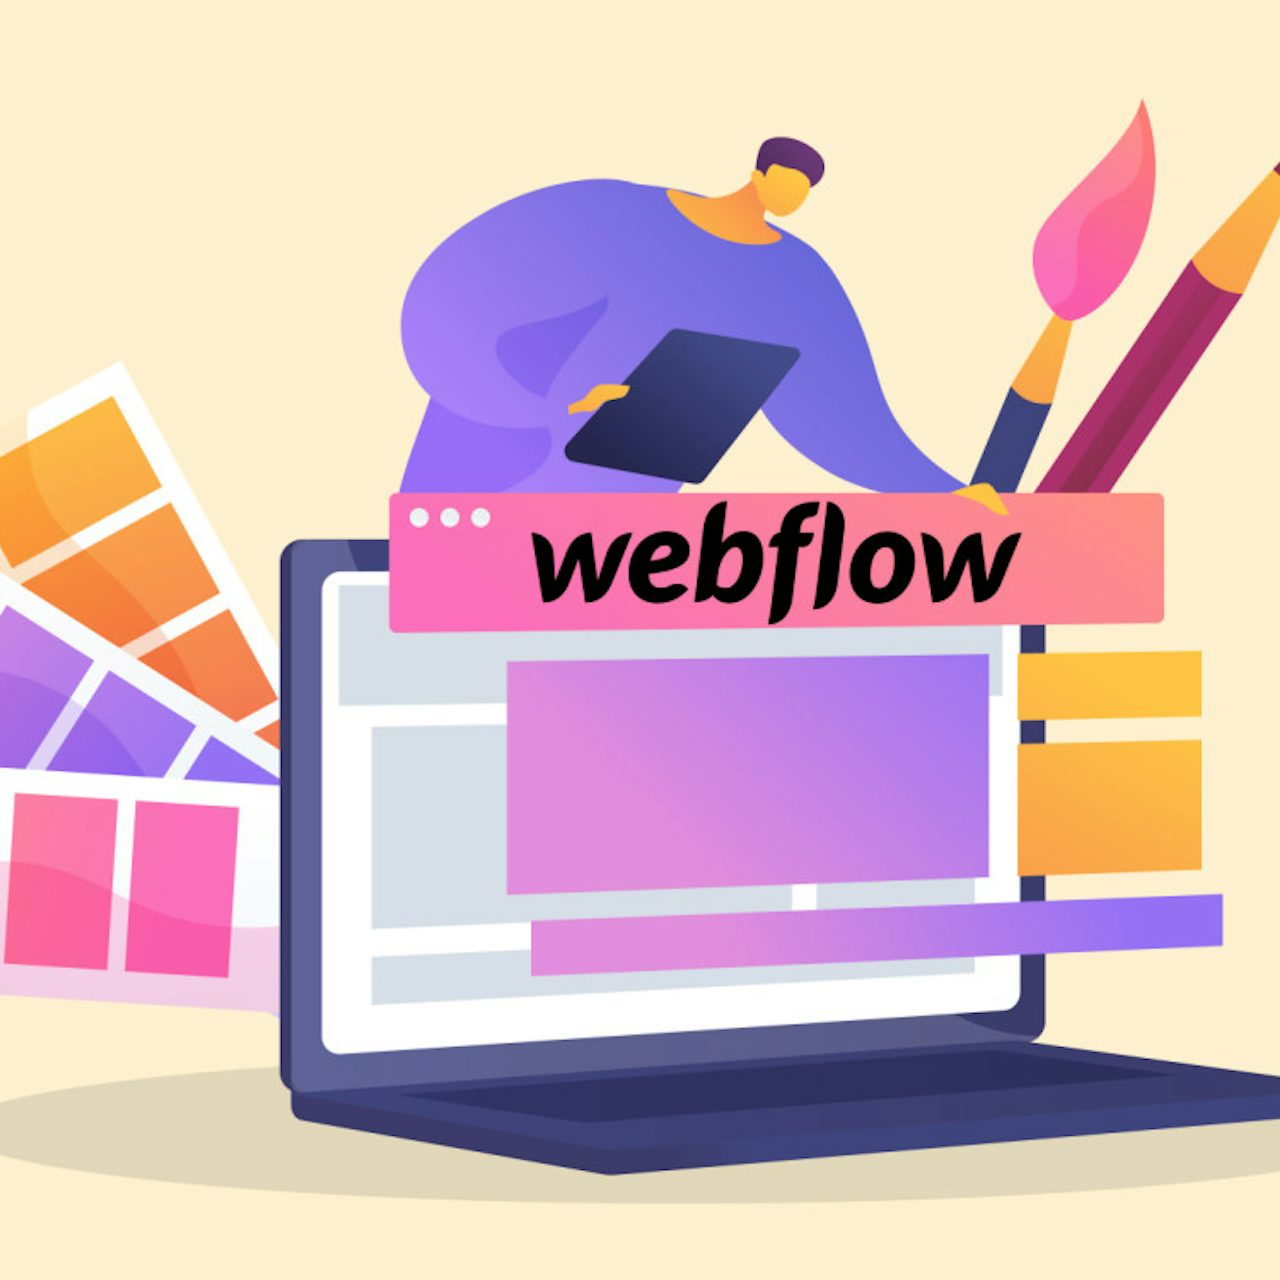 9 Webflow tutorials for a beginner's guide to making a website - 99designs